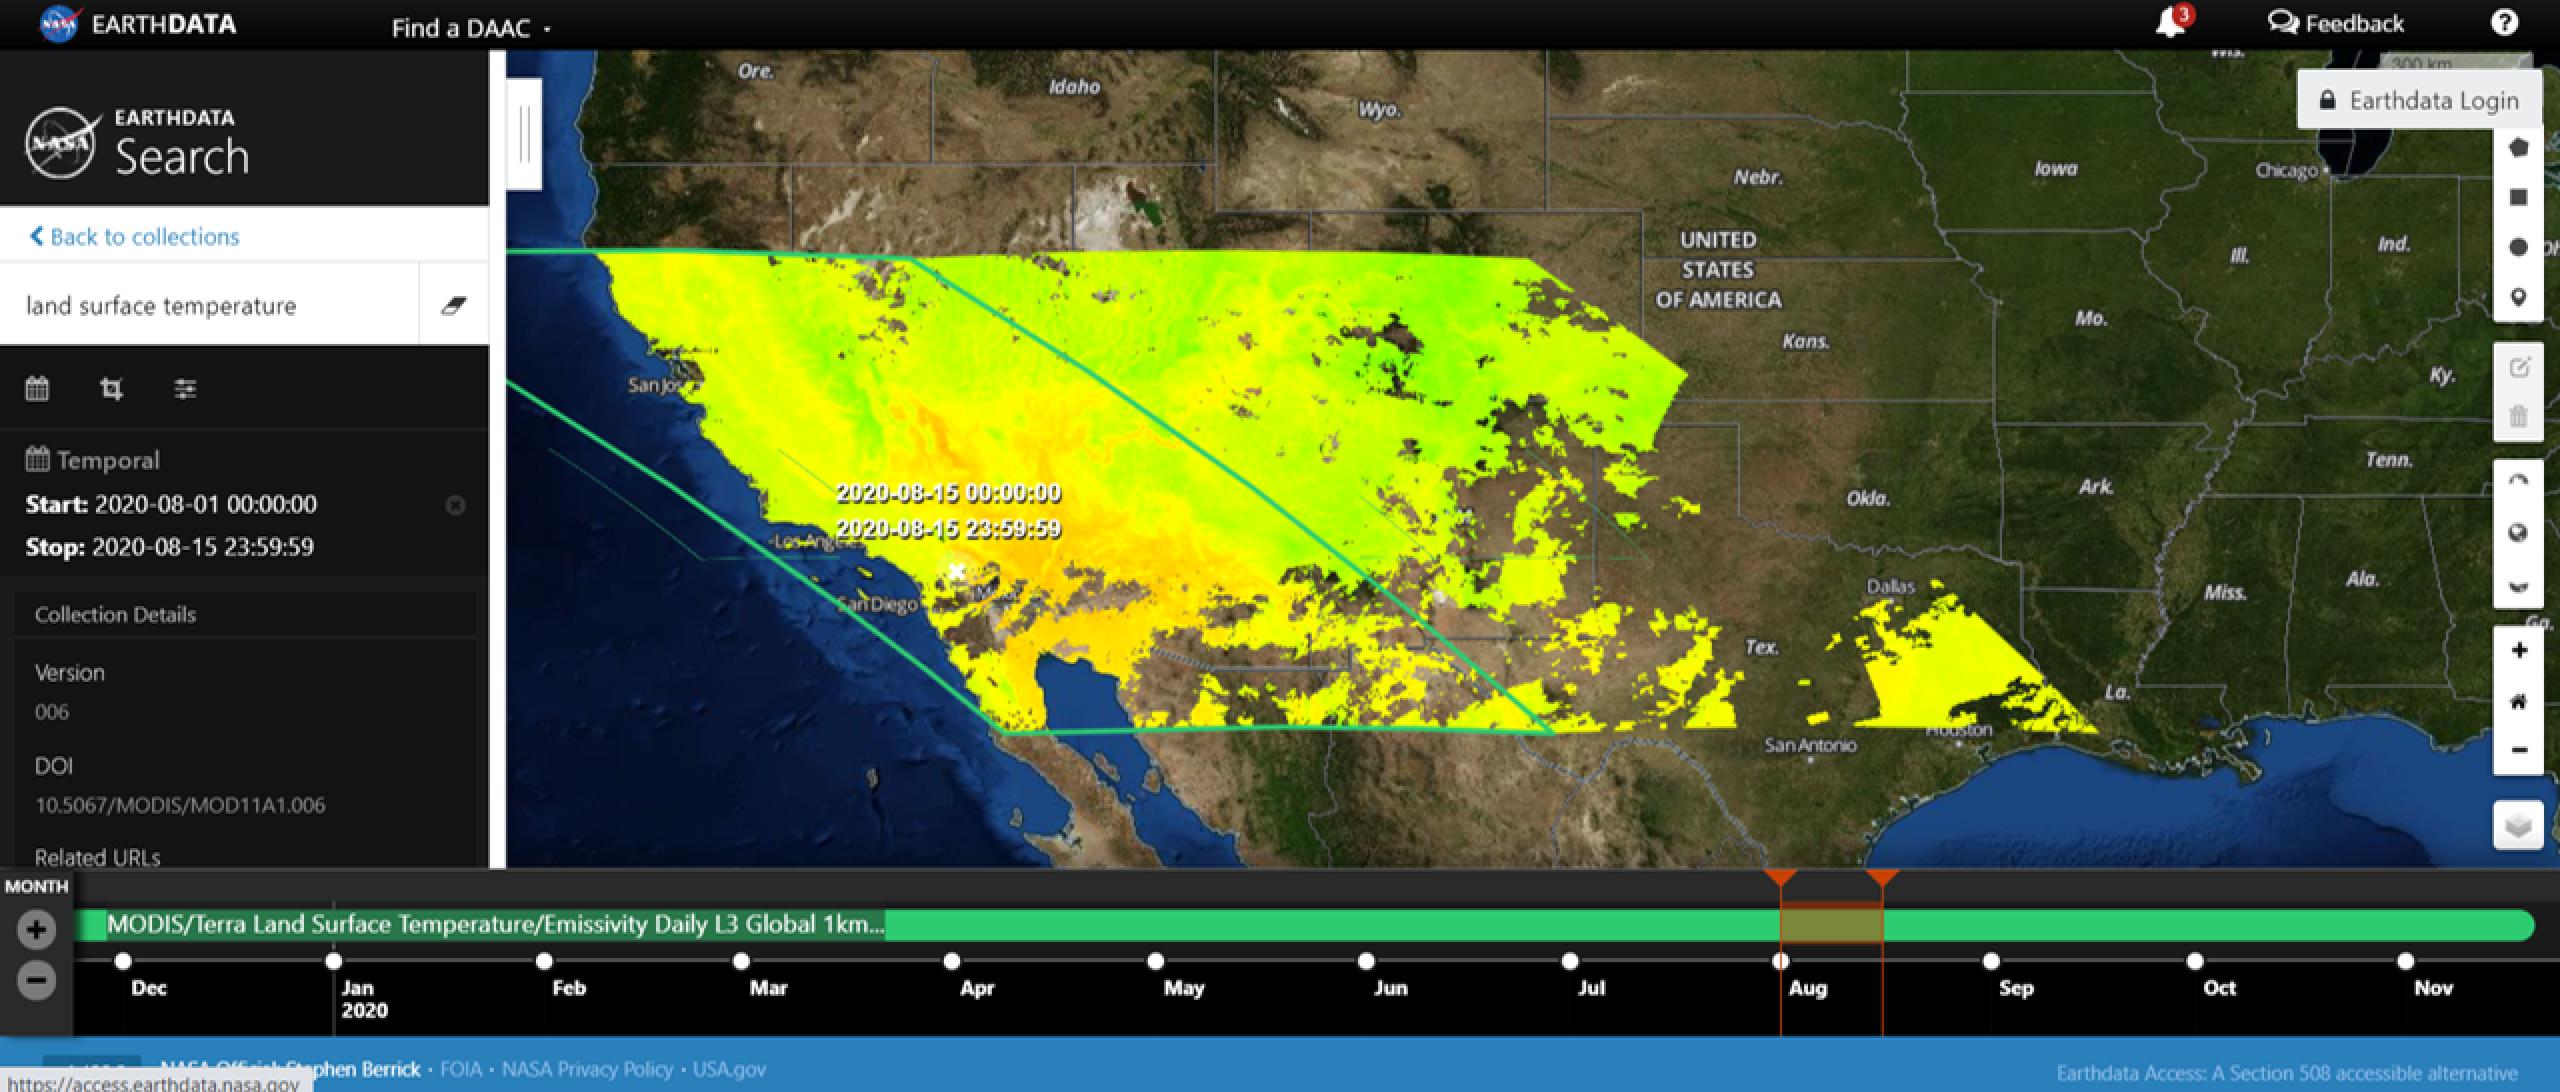 Screenshot of satellite data of the United States with the west coast colored shades or orange, yellow and green